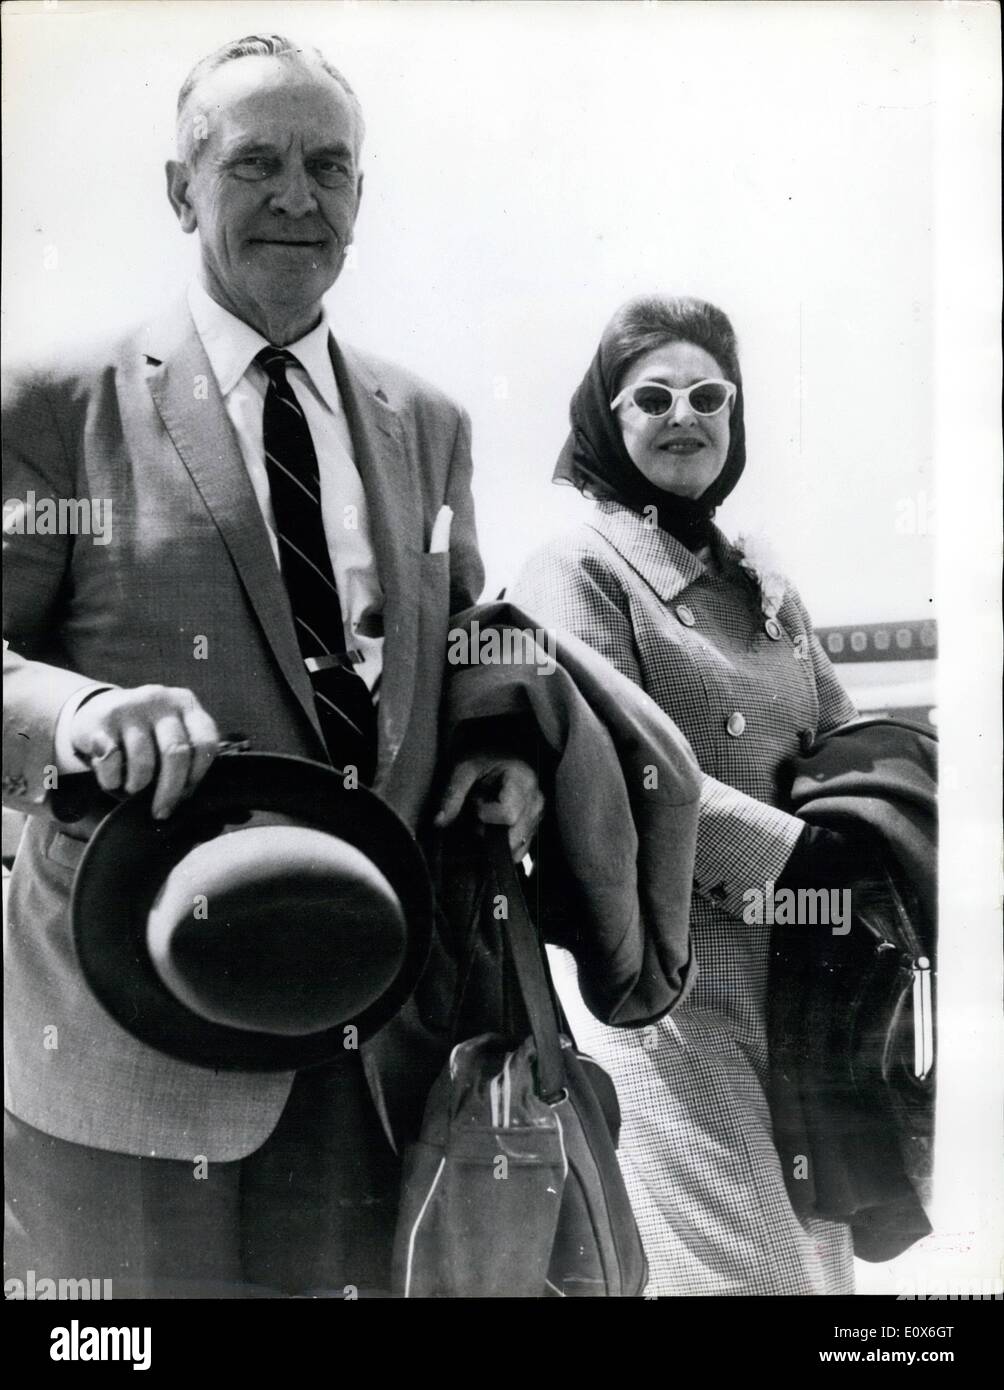 May 05, 1965 - Actor Fredric March and wife in Rome: Fredric March, one of the finest actors Hollywood produced pictured with his wife, actress Florence Eldridge, when they arrived in Rome on Sunday. Stock Photo